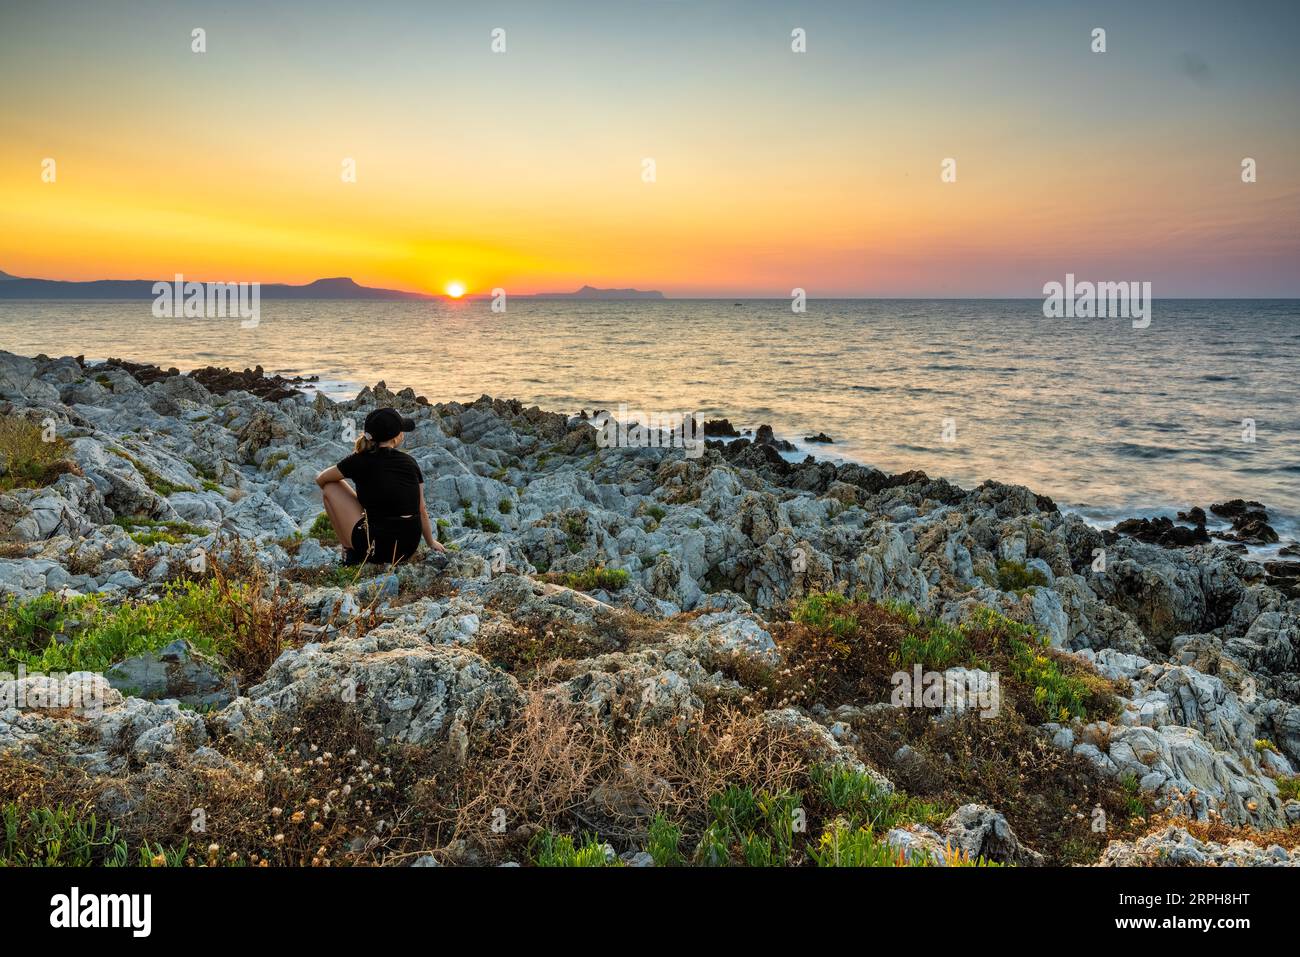 Capture the essence of quiet contemplation as a young girl sits upon the rocks, gazing at the sun's descent over Rethymno's rocky beach. The merging c Stock Photo